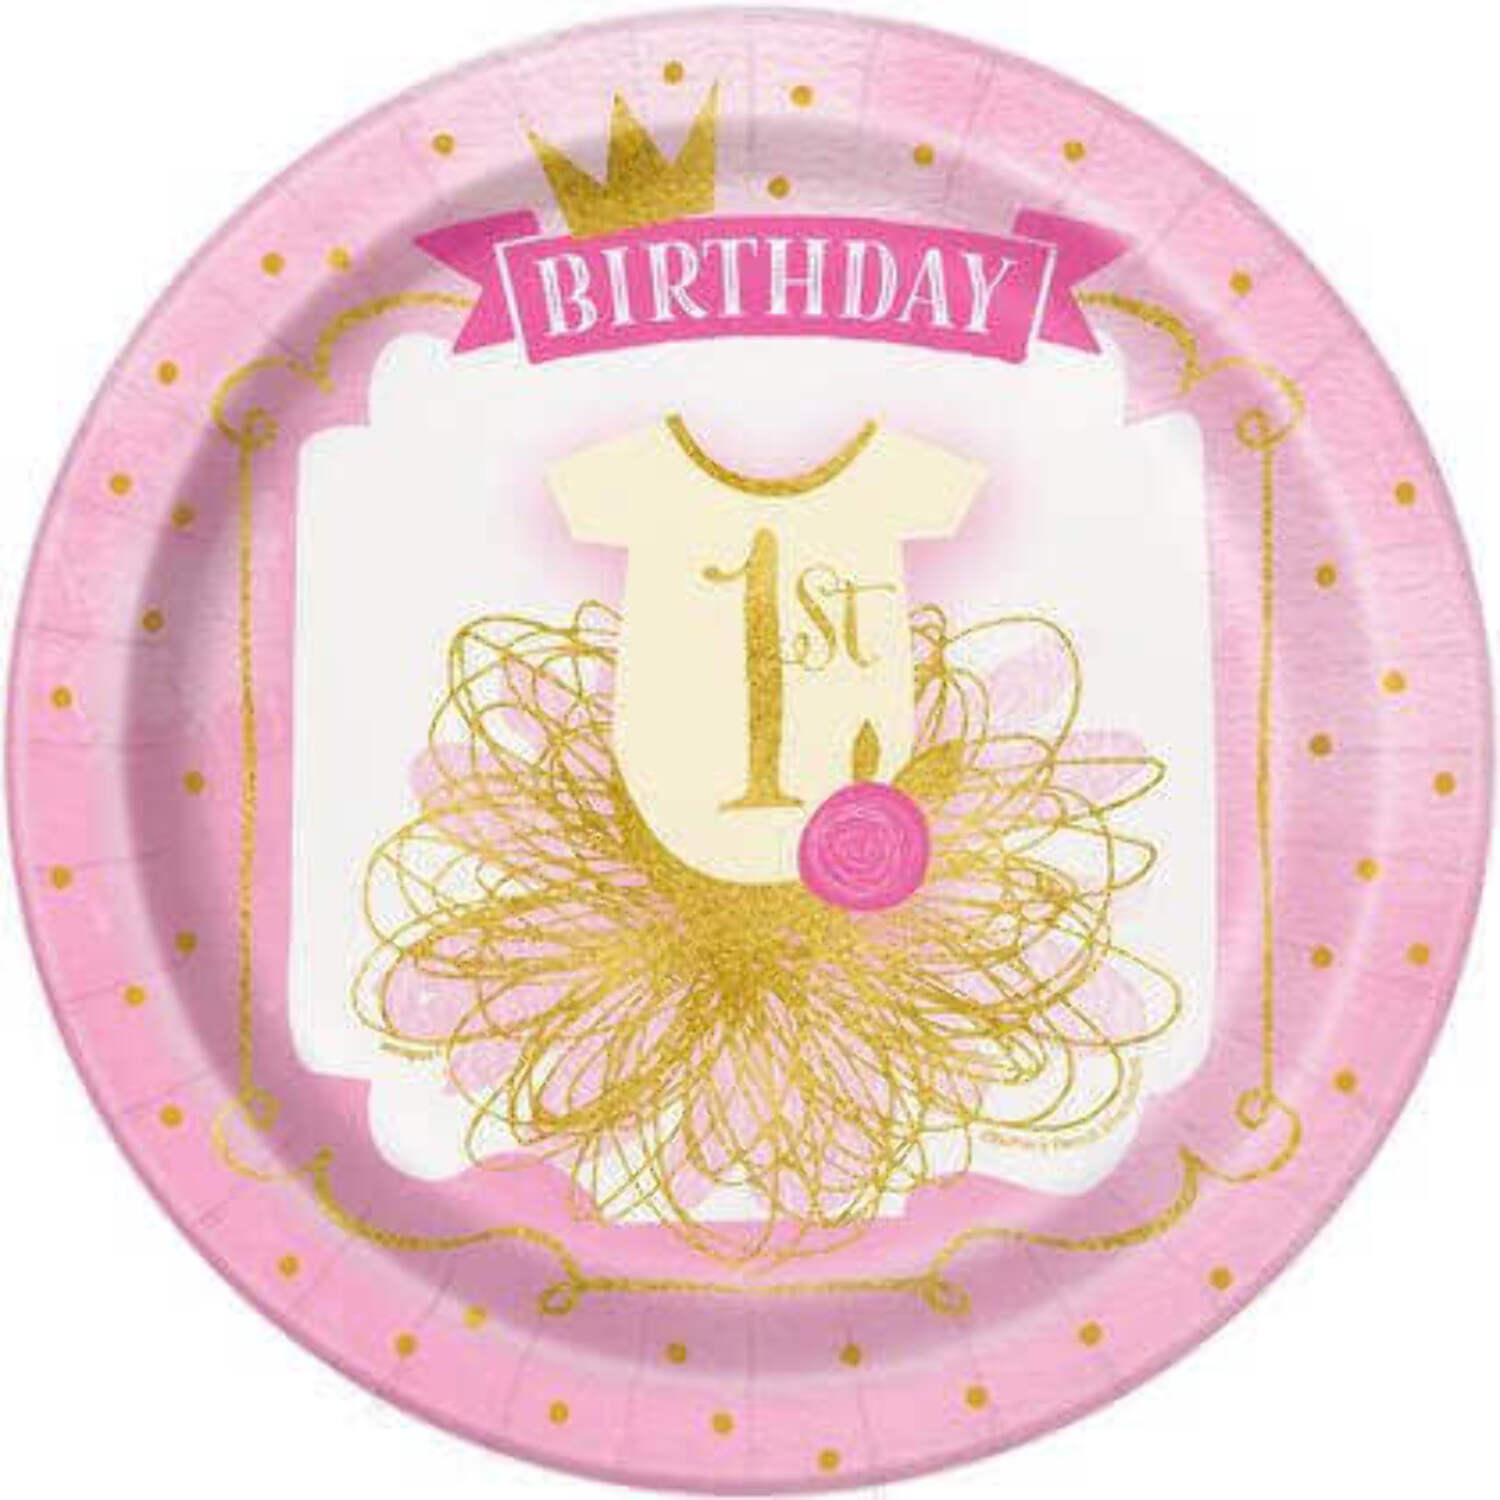 9" Pink and Gold Girls First Birthday Party Plates, 8ct - image 1 of 4